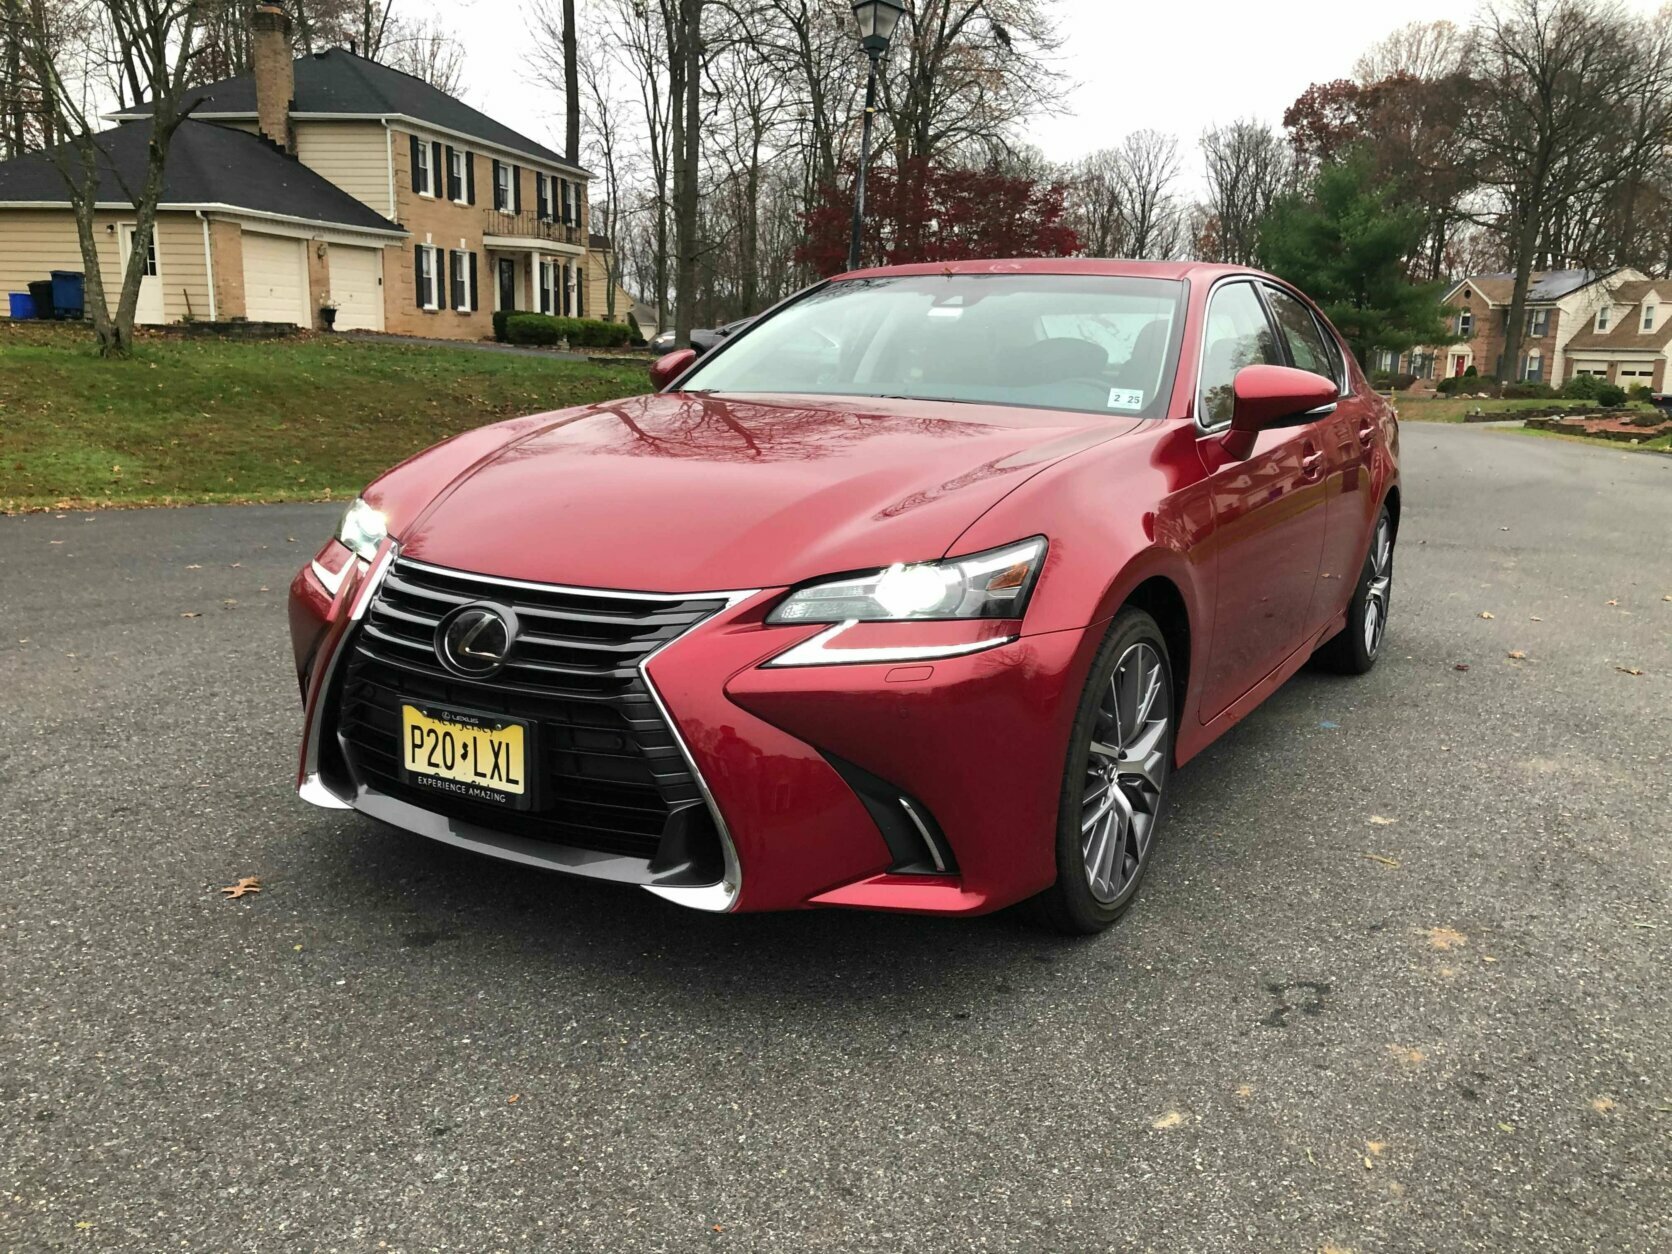 Car Review: Lexus sticks with tried and true formula for GS 350 - WTOP News